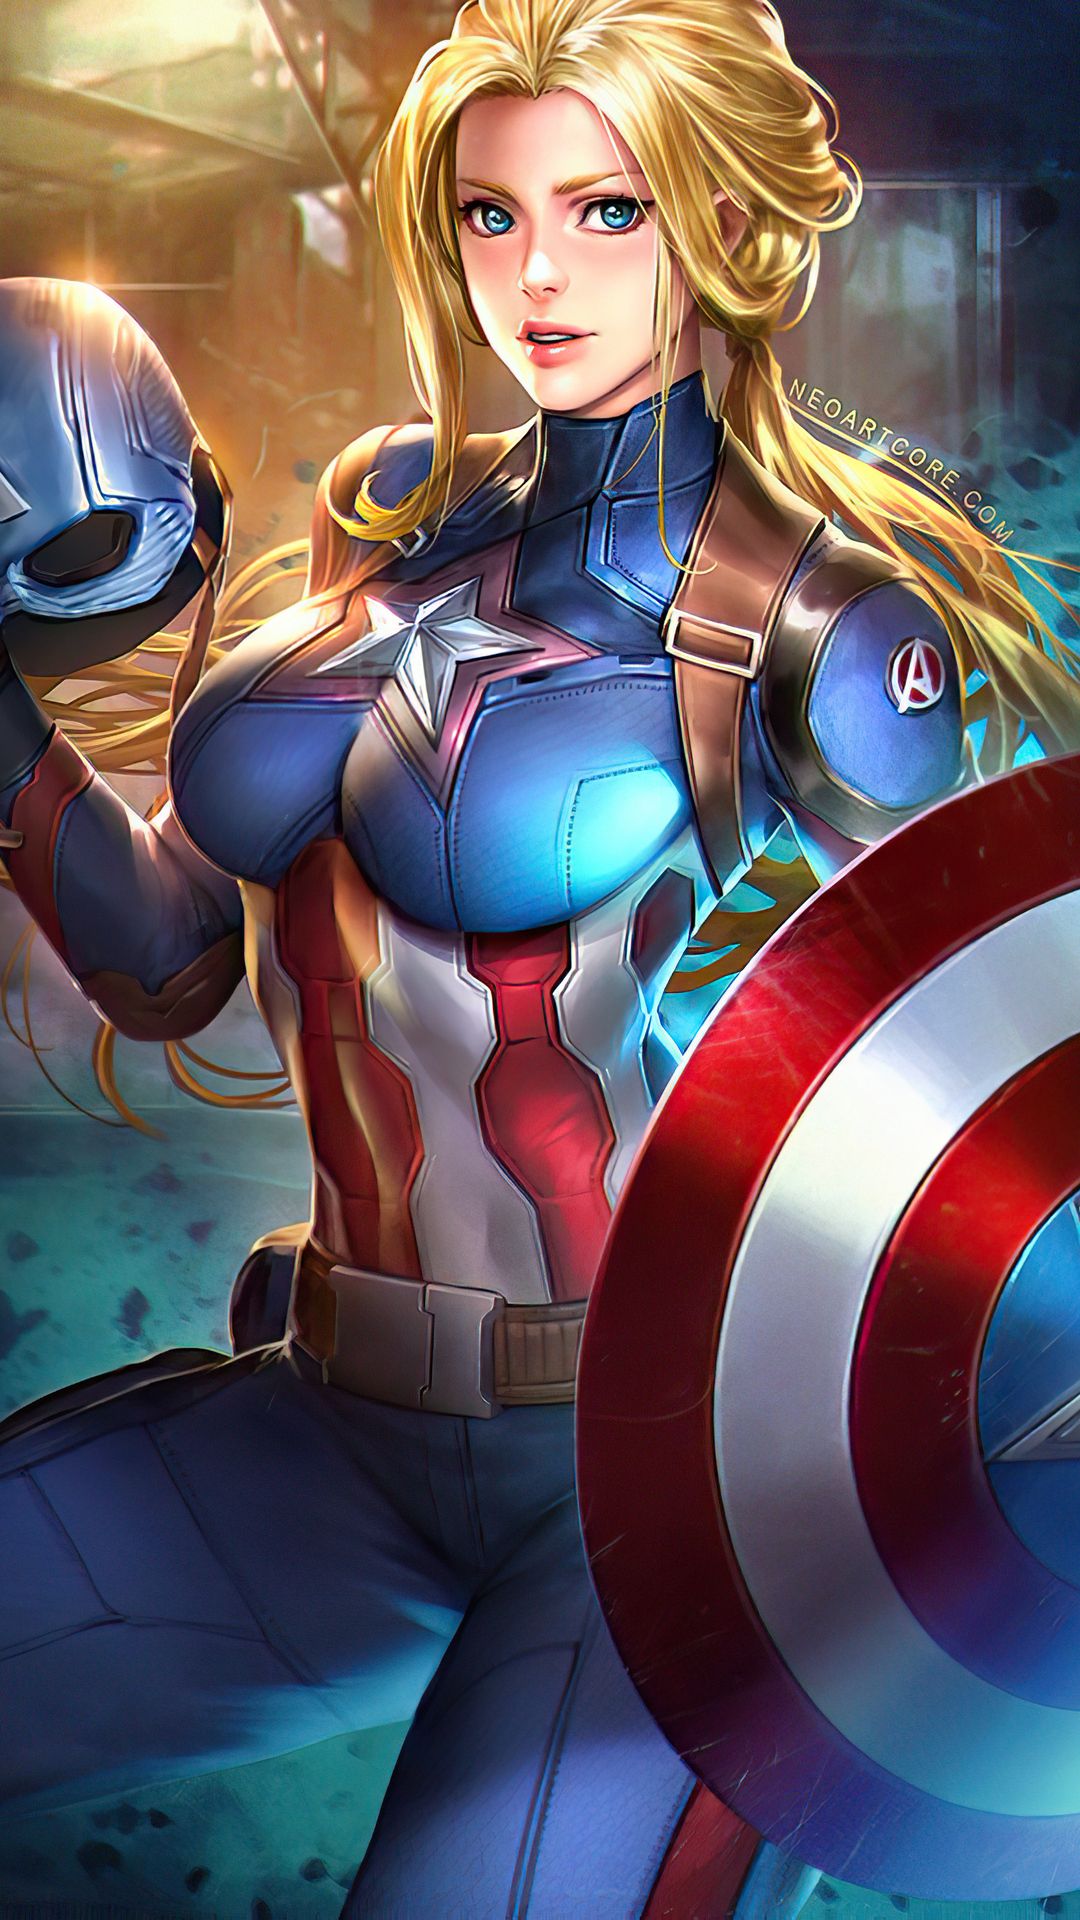 Captain America Girl 4k 2021 iPhone 6s, 6 Plus, Pixel xl , One Plus 3t, 5 HD 4k Wallpaper, Image, Background, Photo and Picture